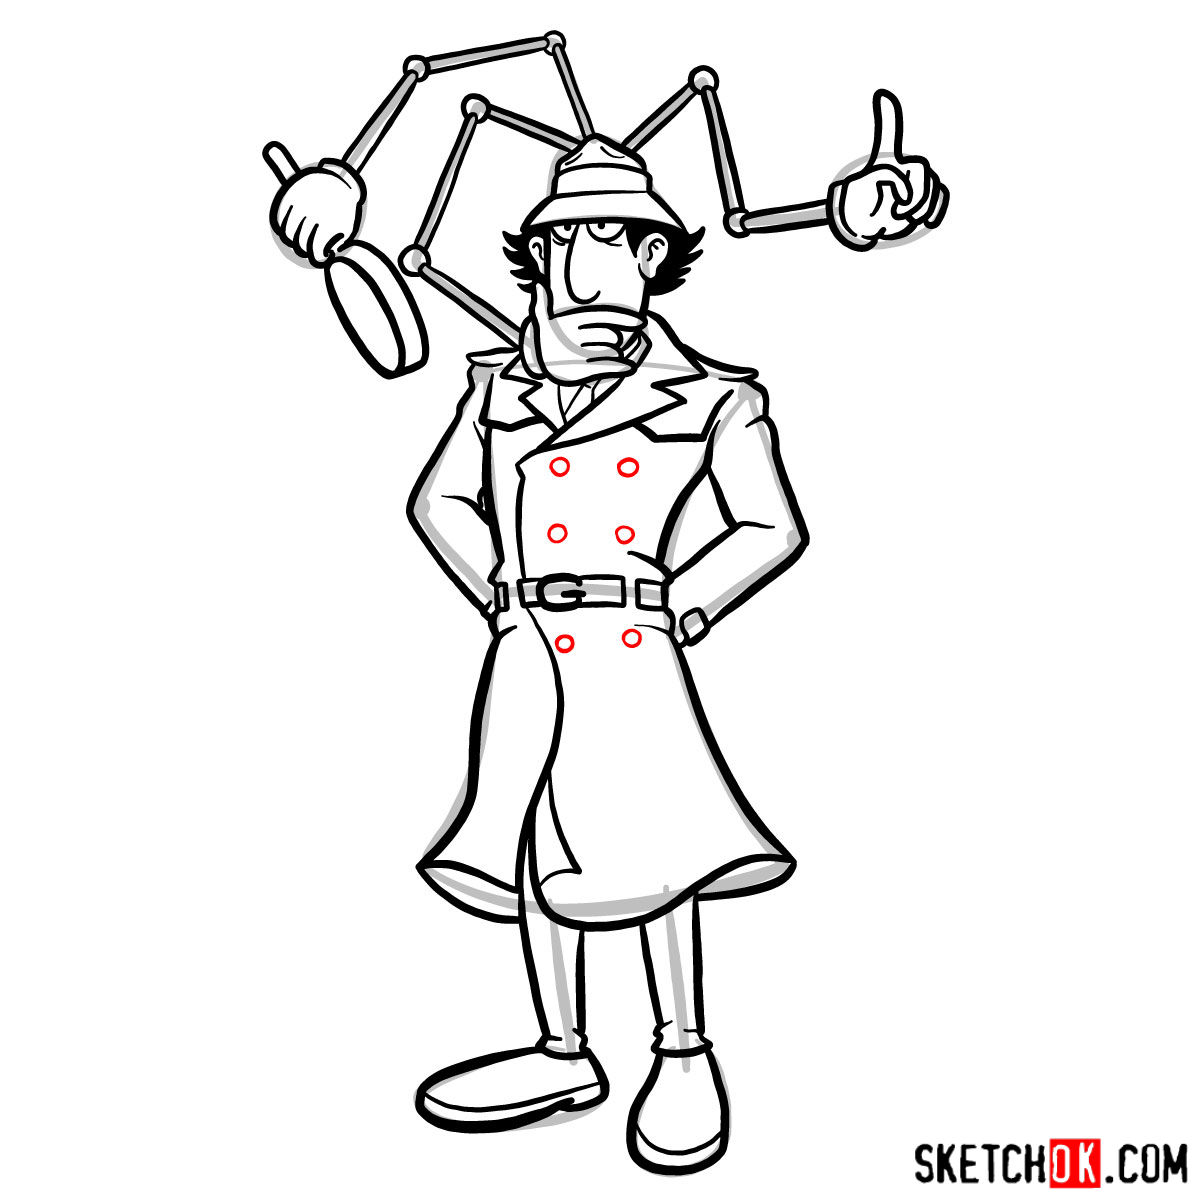 How to draw Inspector Gadget - step 16